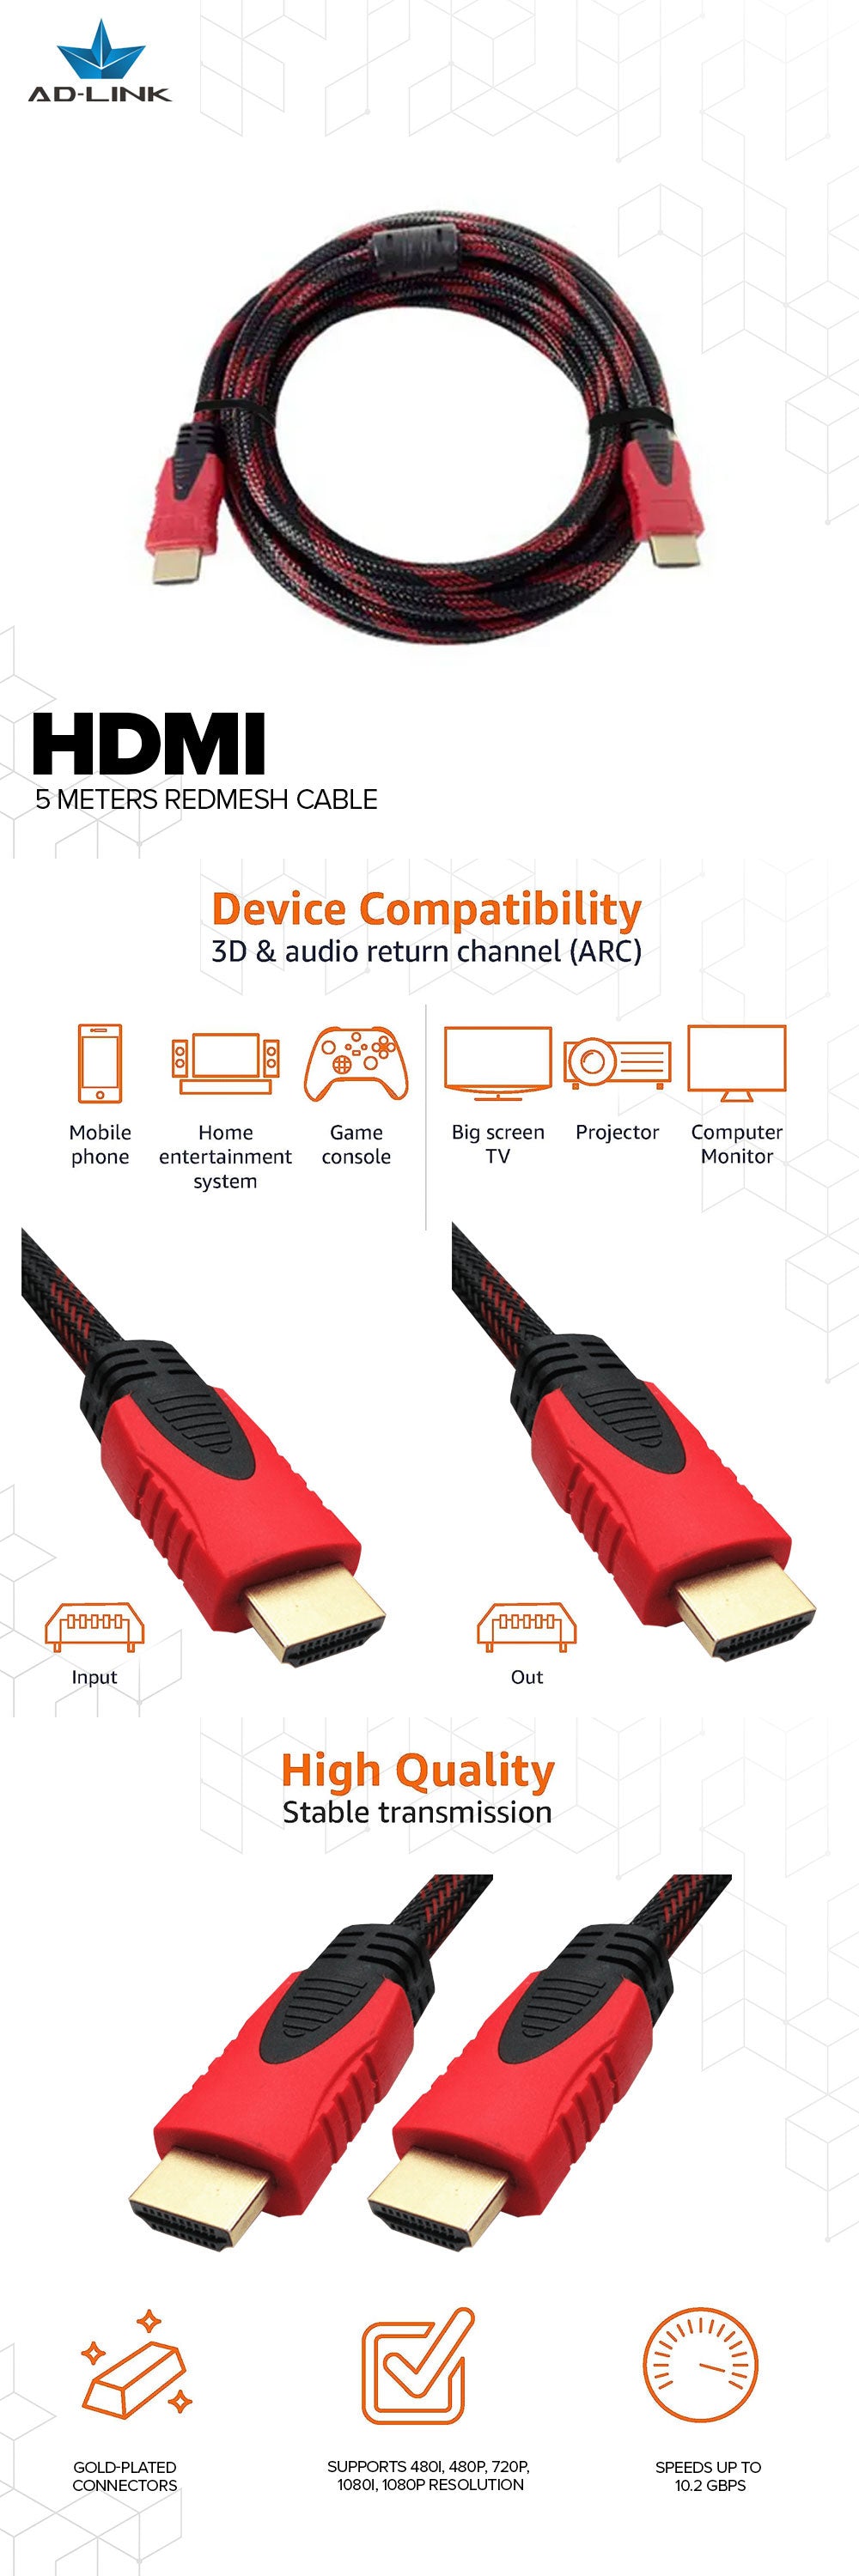 Game One - Ad-Link Display Port to HDMI 1.8m Cable - Game One PH